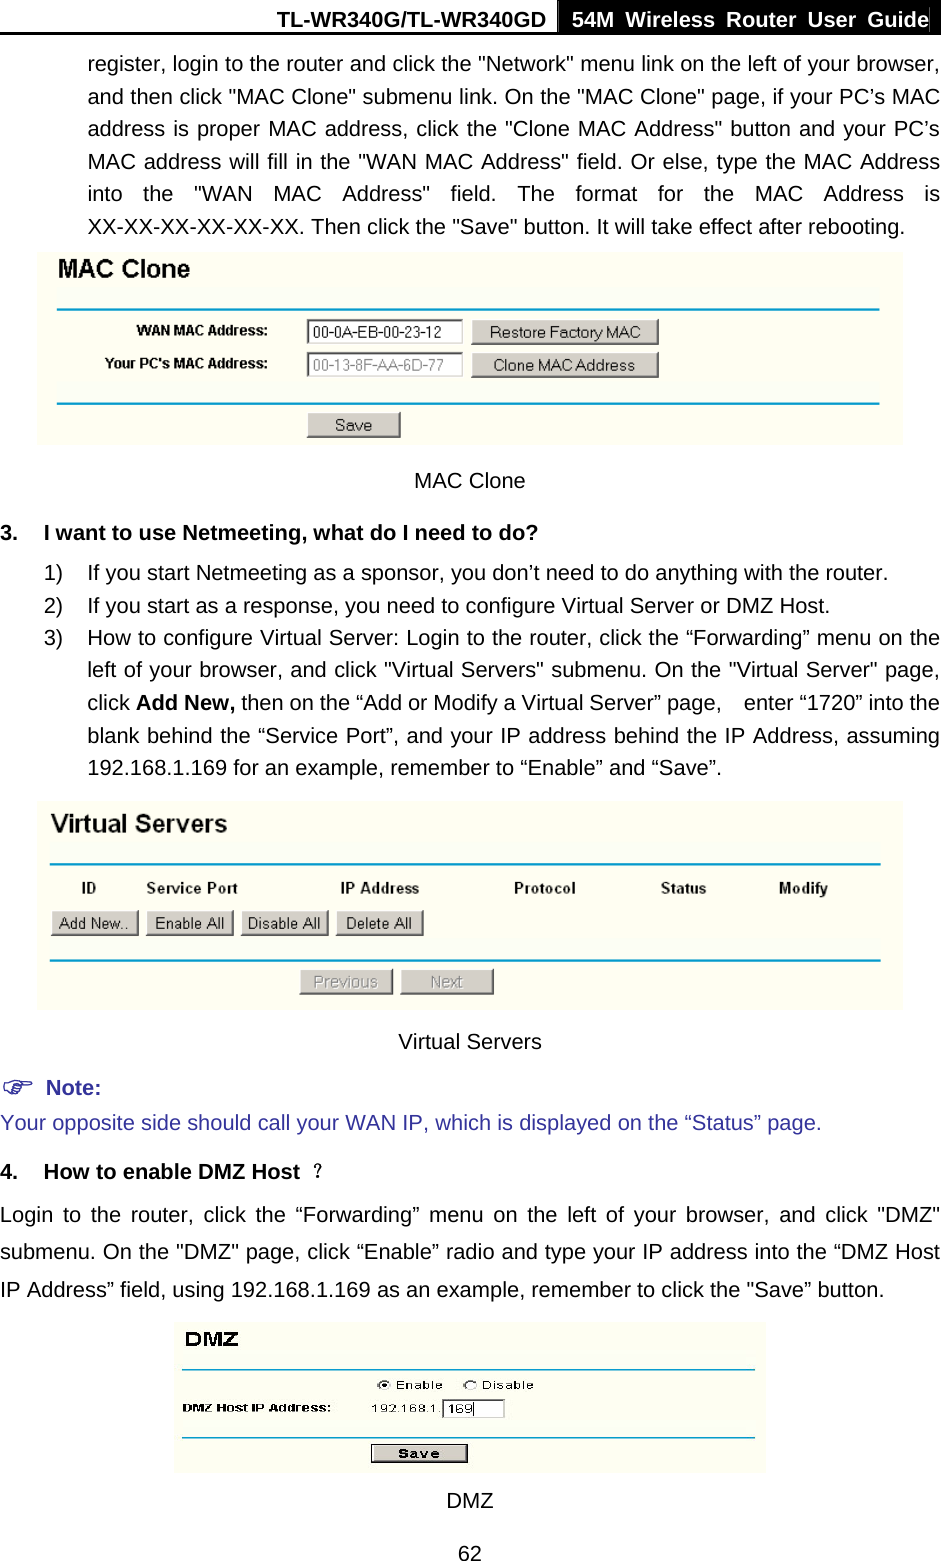 TL-WR340G/TL-WR340GD 54M Wireless Router User Guide  62register, login to the router and click the &quot;Network&quot; menu link on the left of your browser, and then click &quot;MAC Clone&quot; submenu link. On the &quot;MAC Clone&quot; page, if your PC’s MAC address is proper MAC address, click the &quot;Clone MAC Address&quot; button and your PC’s MAC address will fill in the &quot;WAN MAC Address&quot; field. Or else, type the MAC Address into the &quot;WAN MAC Address&quot; field. The format for the MAC Address is XX-XX-XX-XX-XX-XX. Then click the &quot;Save&quot; button. It will take effect after rebooting.  MAC Clone 3.  I want to use Netmeeting, what do I need to do? 1)  If you start Netmeeting as a sponsor, you don’t need to do anything with the router. 2)  If you start as a response, you need to configure Virtual Server or DMZ Host. 3)  How to configure Virtual Server: Login to the router, click the “Forwarding” menu on the left of your browser, and click &quot;Virtual Servers&quot; submenu. On the &quot;Virtual Server&quot; page, click Add New, then on the “Add or Modify a Virtual Server” page,    enter “1720” into the blank behind the “Service Port”, and your IP address behind the IP Address, assuming 192.168.1.169 for an example, remember to “Enable” and “Save”.    Virtual Servers ) Note: Your opposite side should call your WAN IP, which is displayed on the “Status” page. 4.  How to enable DMZ Host  ？ Login to the router, click the “Forwarding” menu on the left of your browser, and click &quot;DMZ&quot; submenu. On the &quot;DMZ&quot; page, click “Enable” radio and type your IP address into the “DMZ Host IP Address” field, using 192.168.1.169 as an example, remember to click the &quot;Save” button.    DMZ 